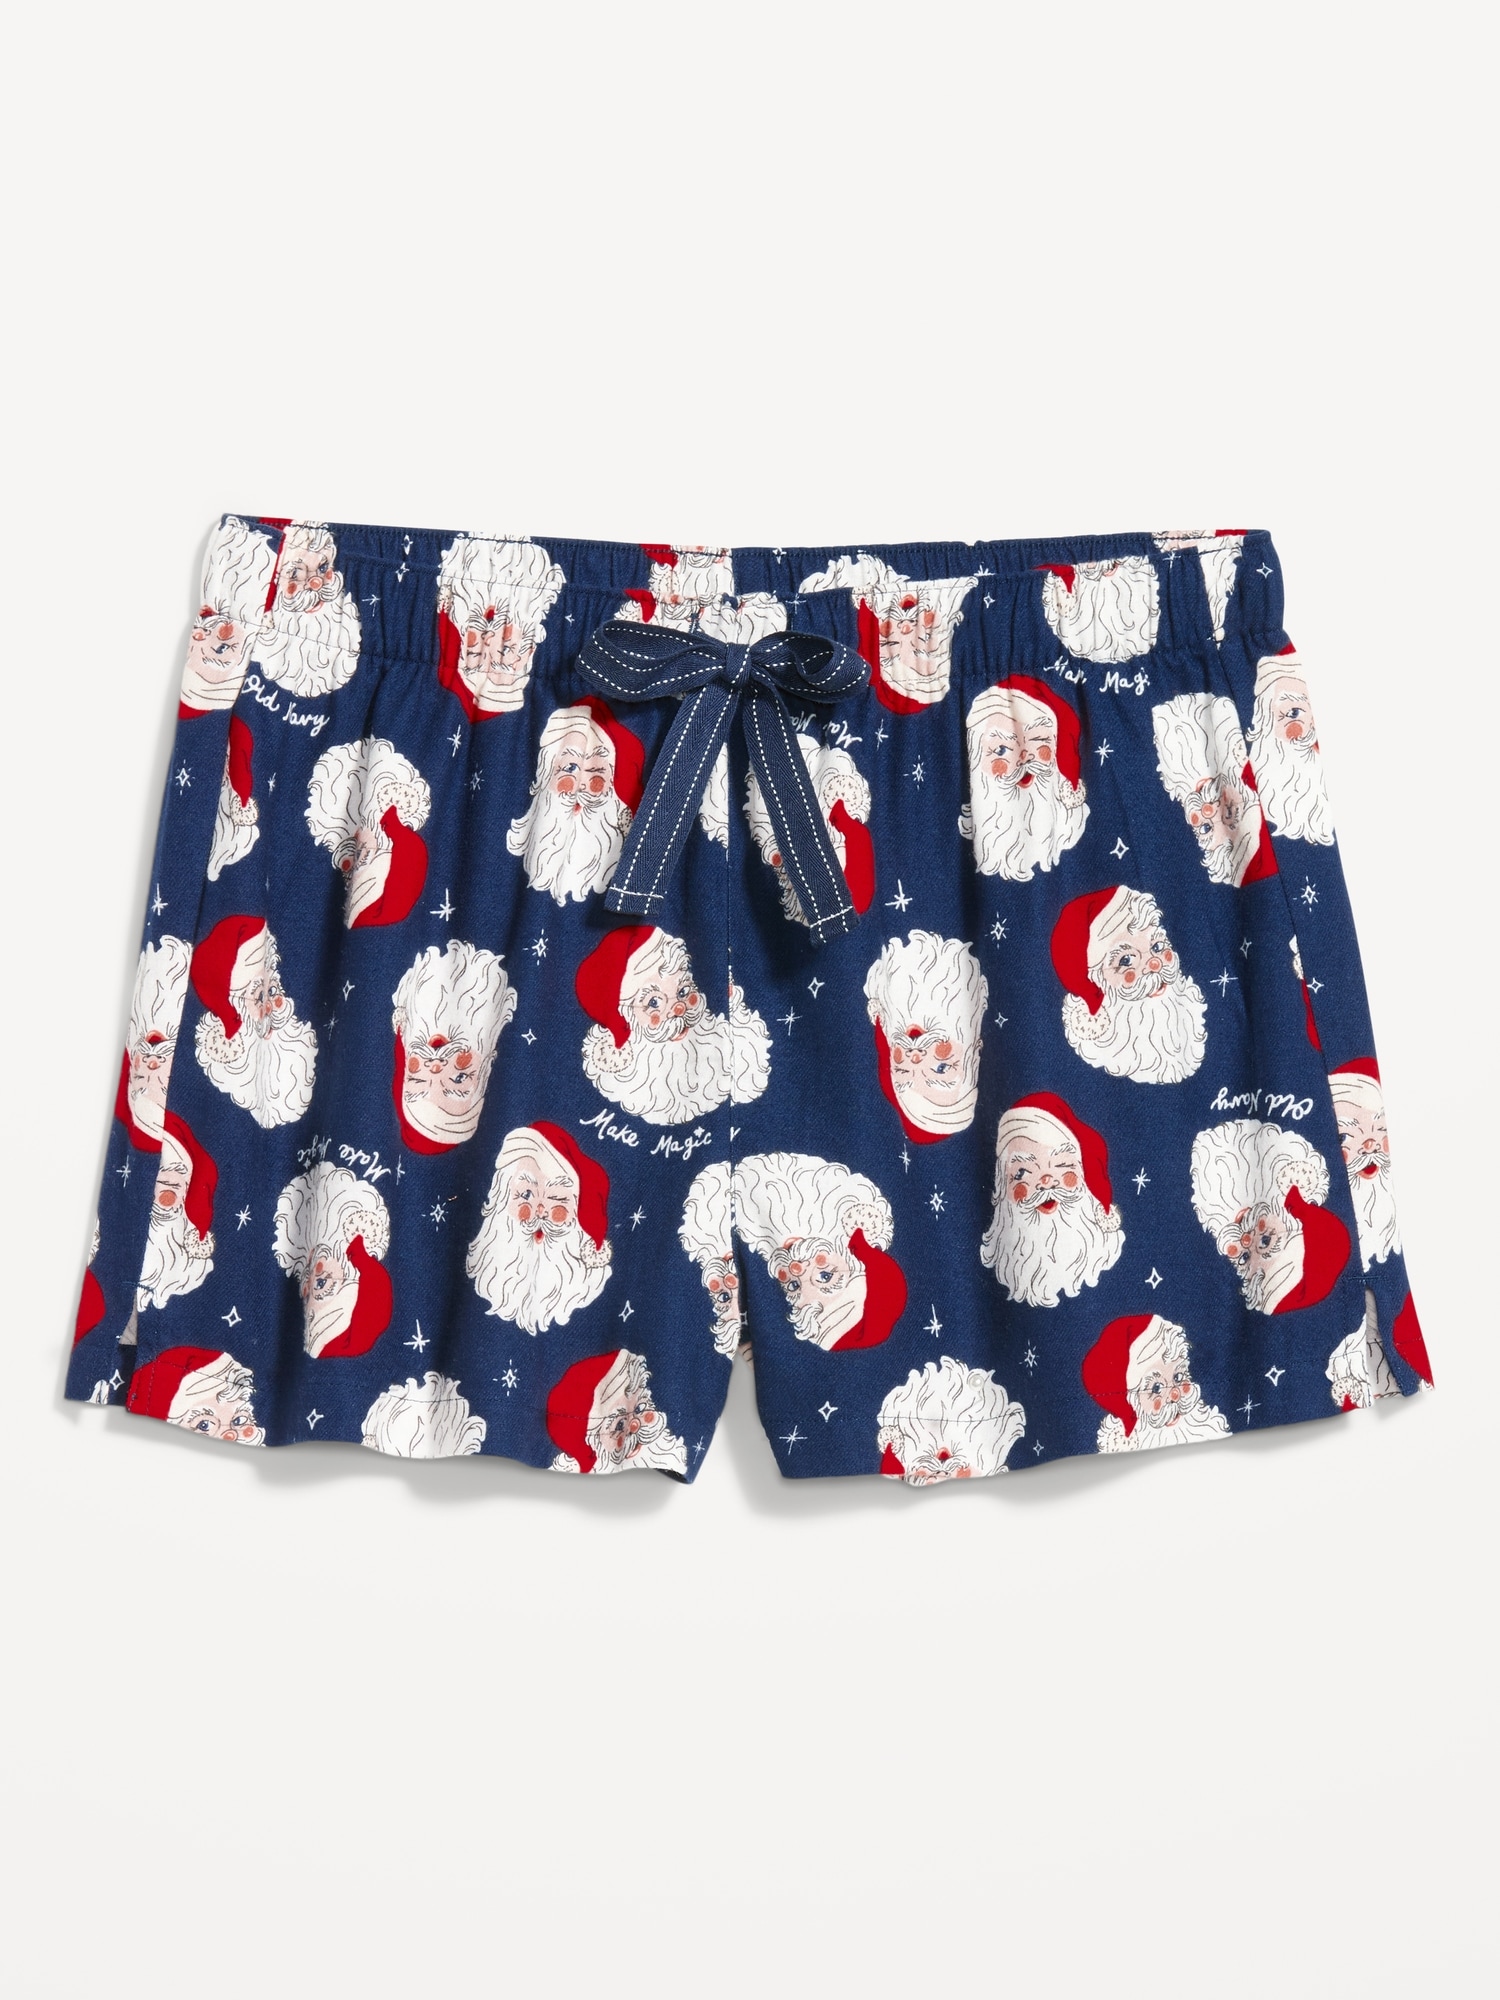 Old Navy Matching Printed Flannel Pajama Shorts -- 2.5-inch inseam